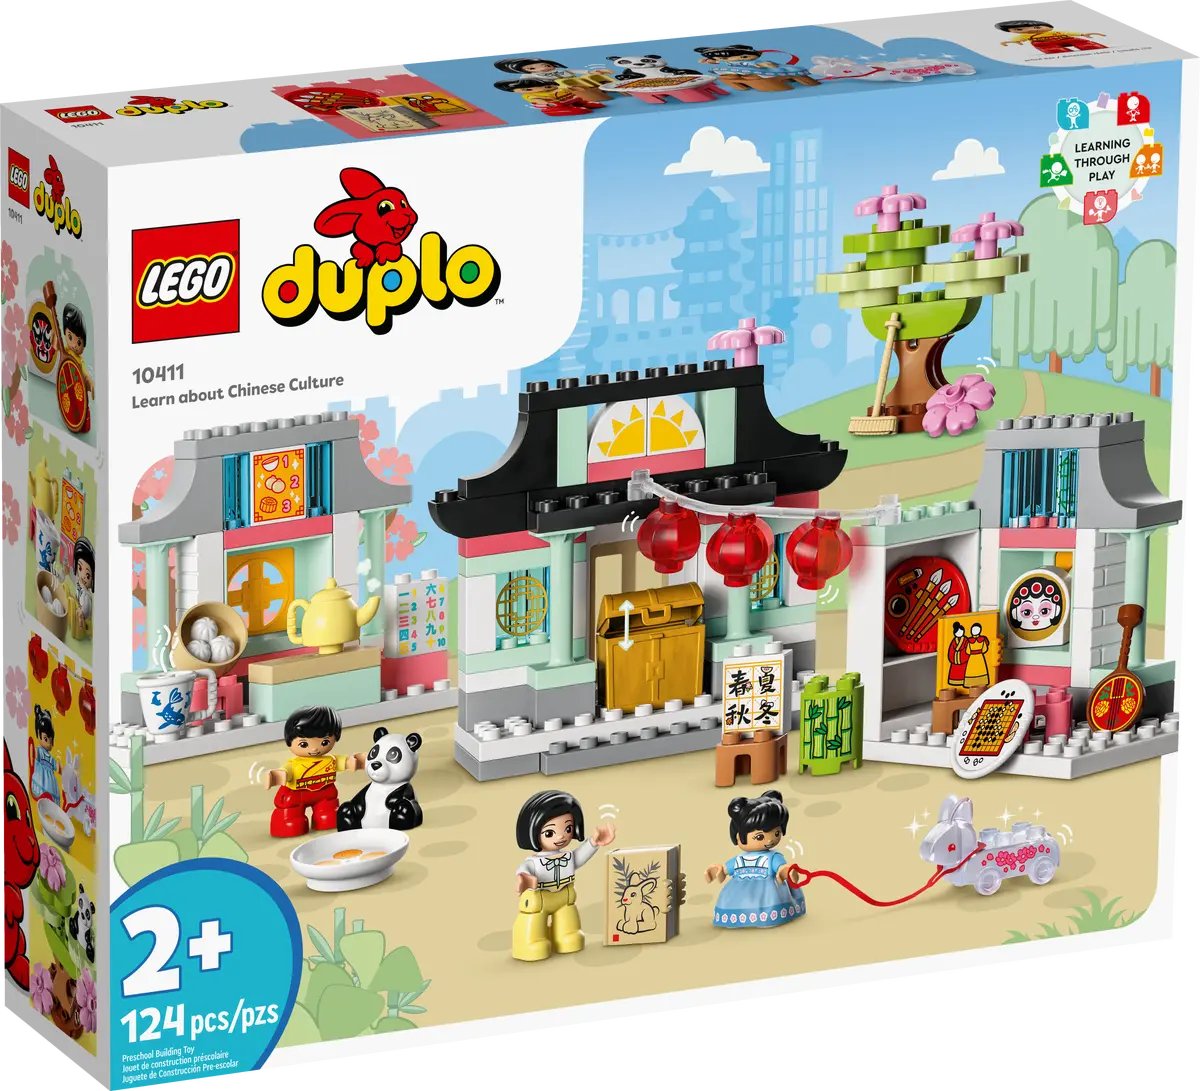 Конструктор Lego Duplo Learn About Chinese Culture 10411, 124 детали